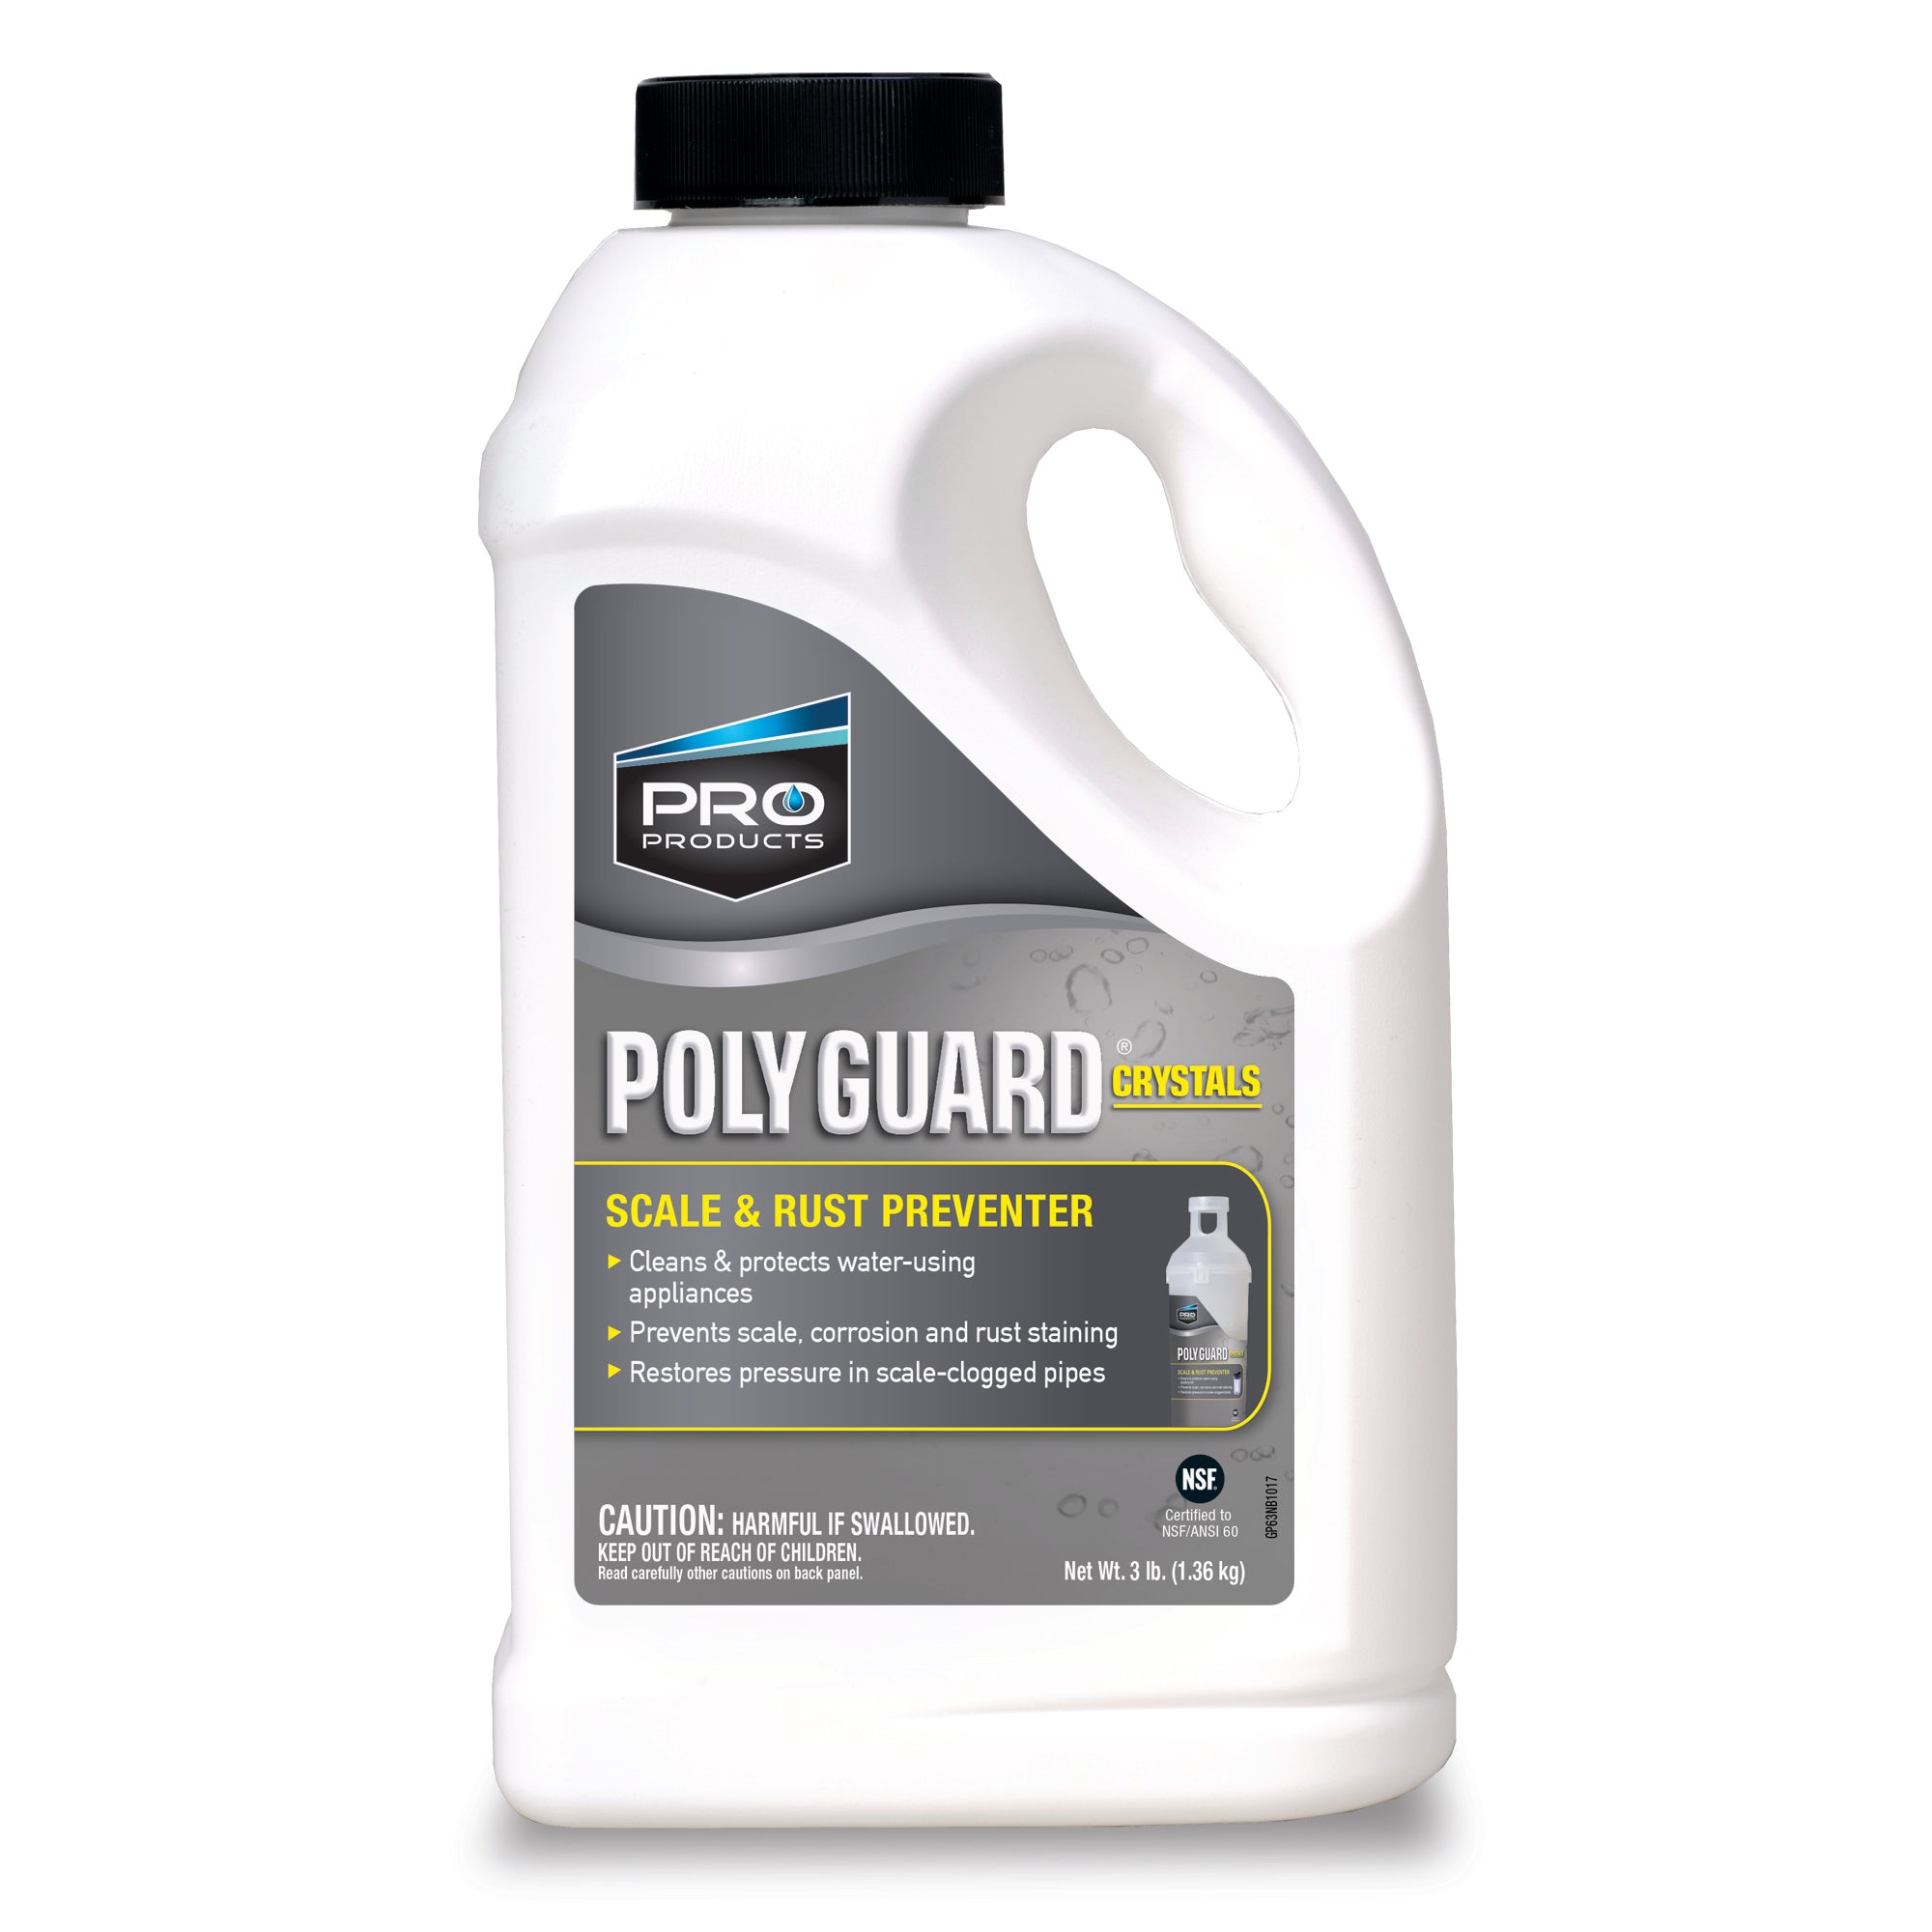 Poly Guard Crystals-Scale and Rust Preventoer-3 lb (6 units)